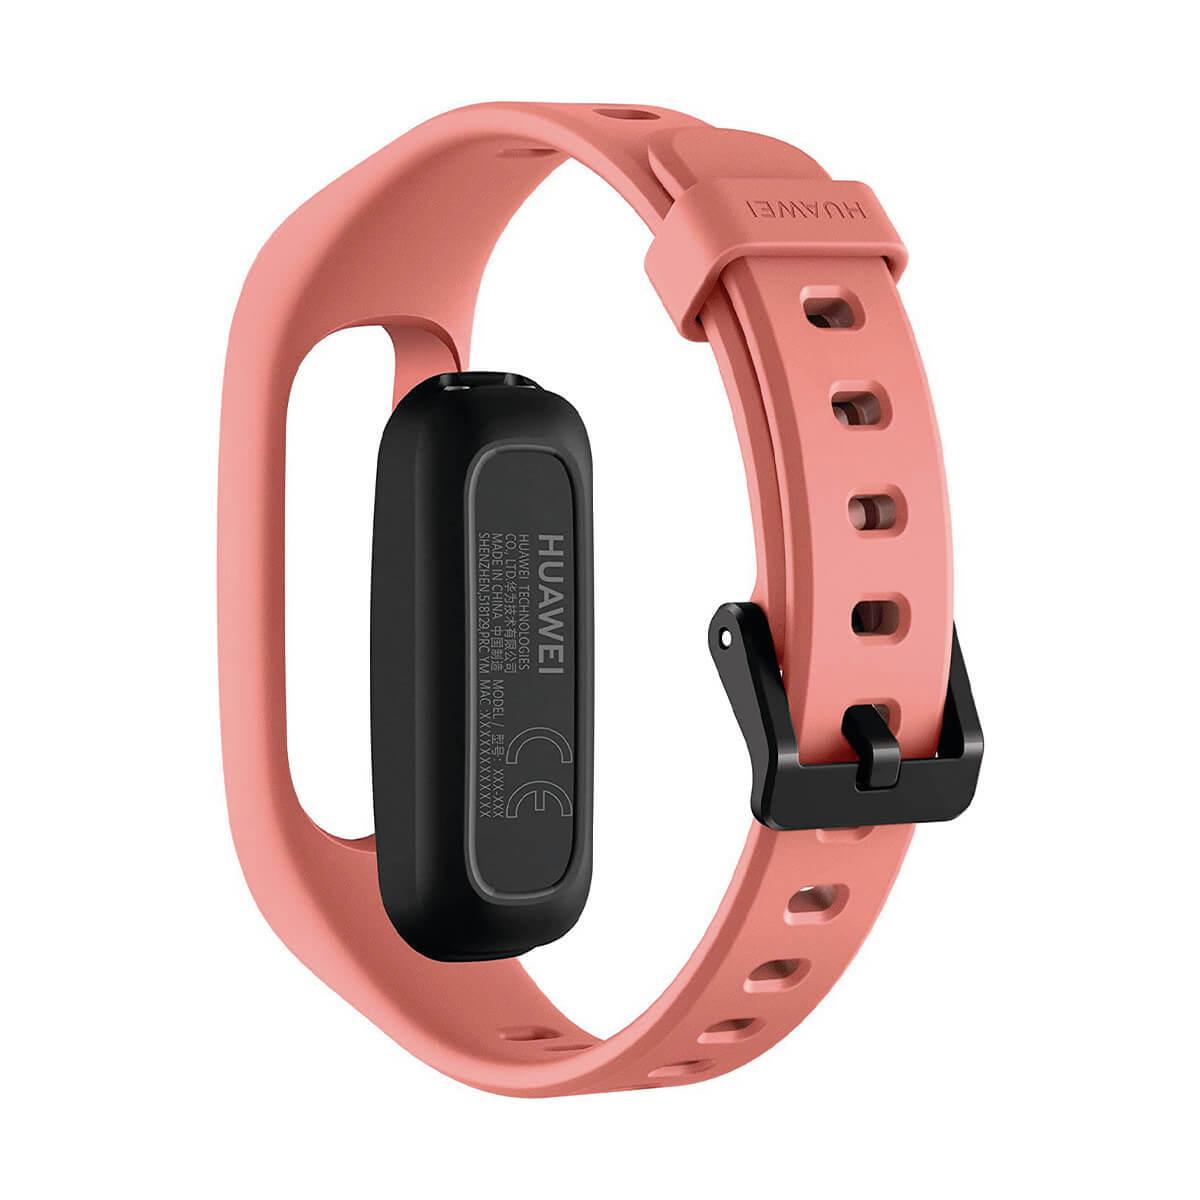 HUAWEI 55025929 BAND 4E AW70-B49 RED, MINERAL Red Fitness ACTIVE Mineral uni, Tracker